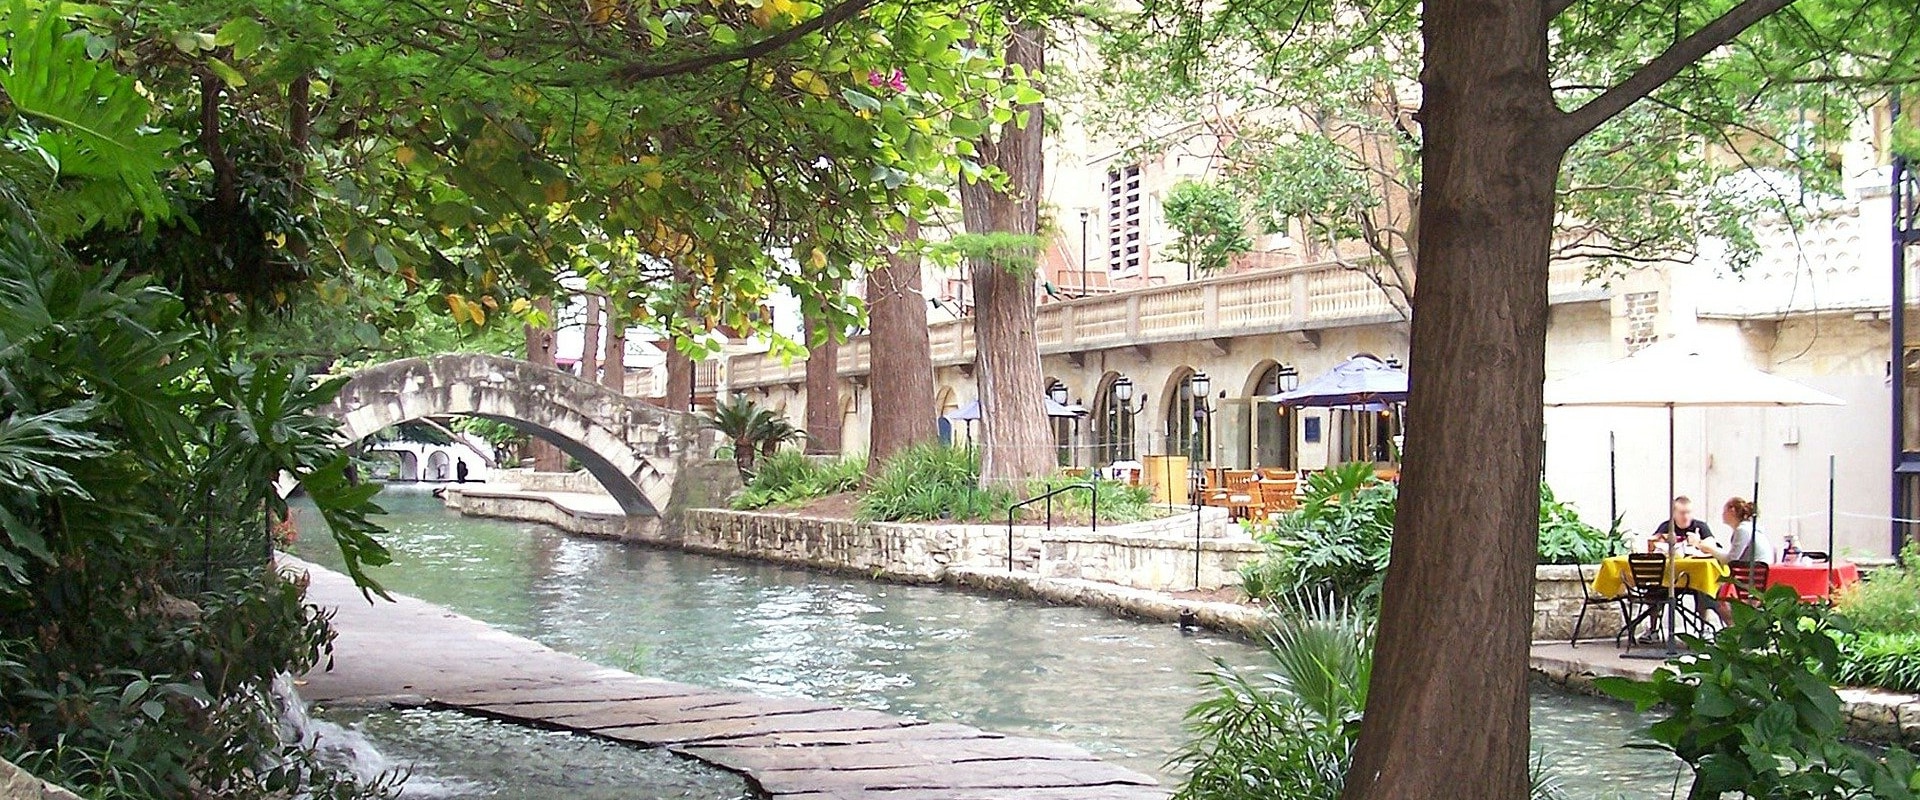 Is san antonio texas a cheap place to live?